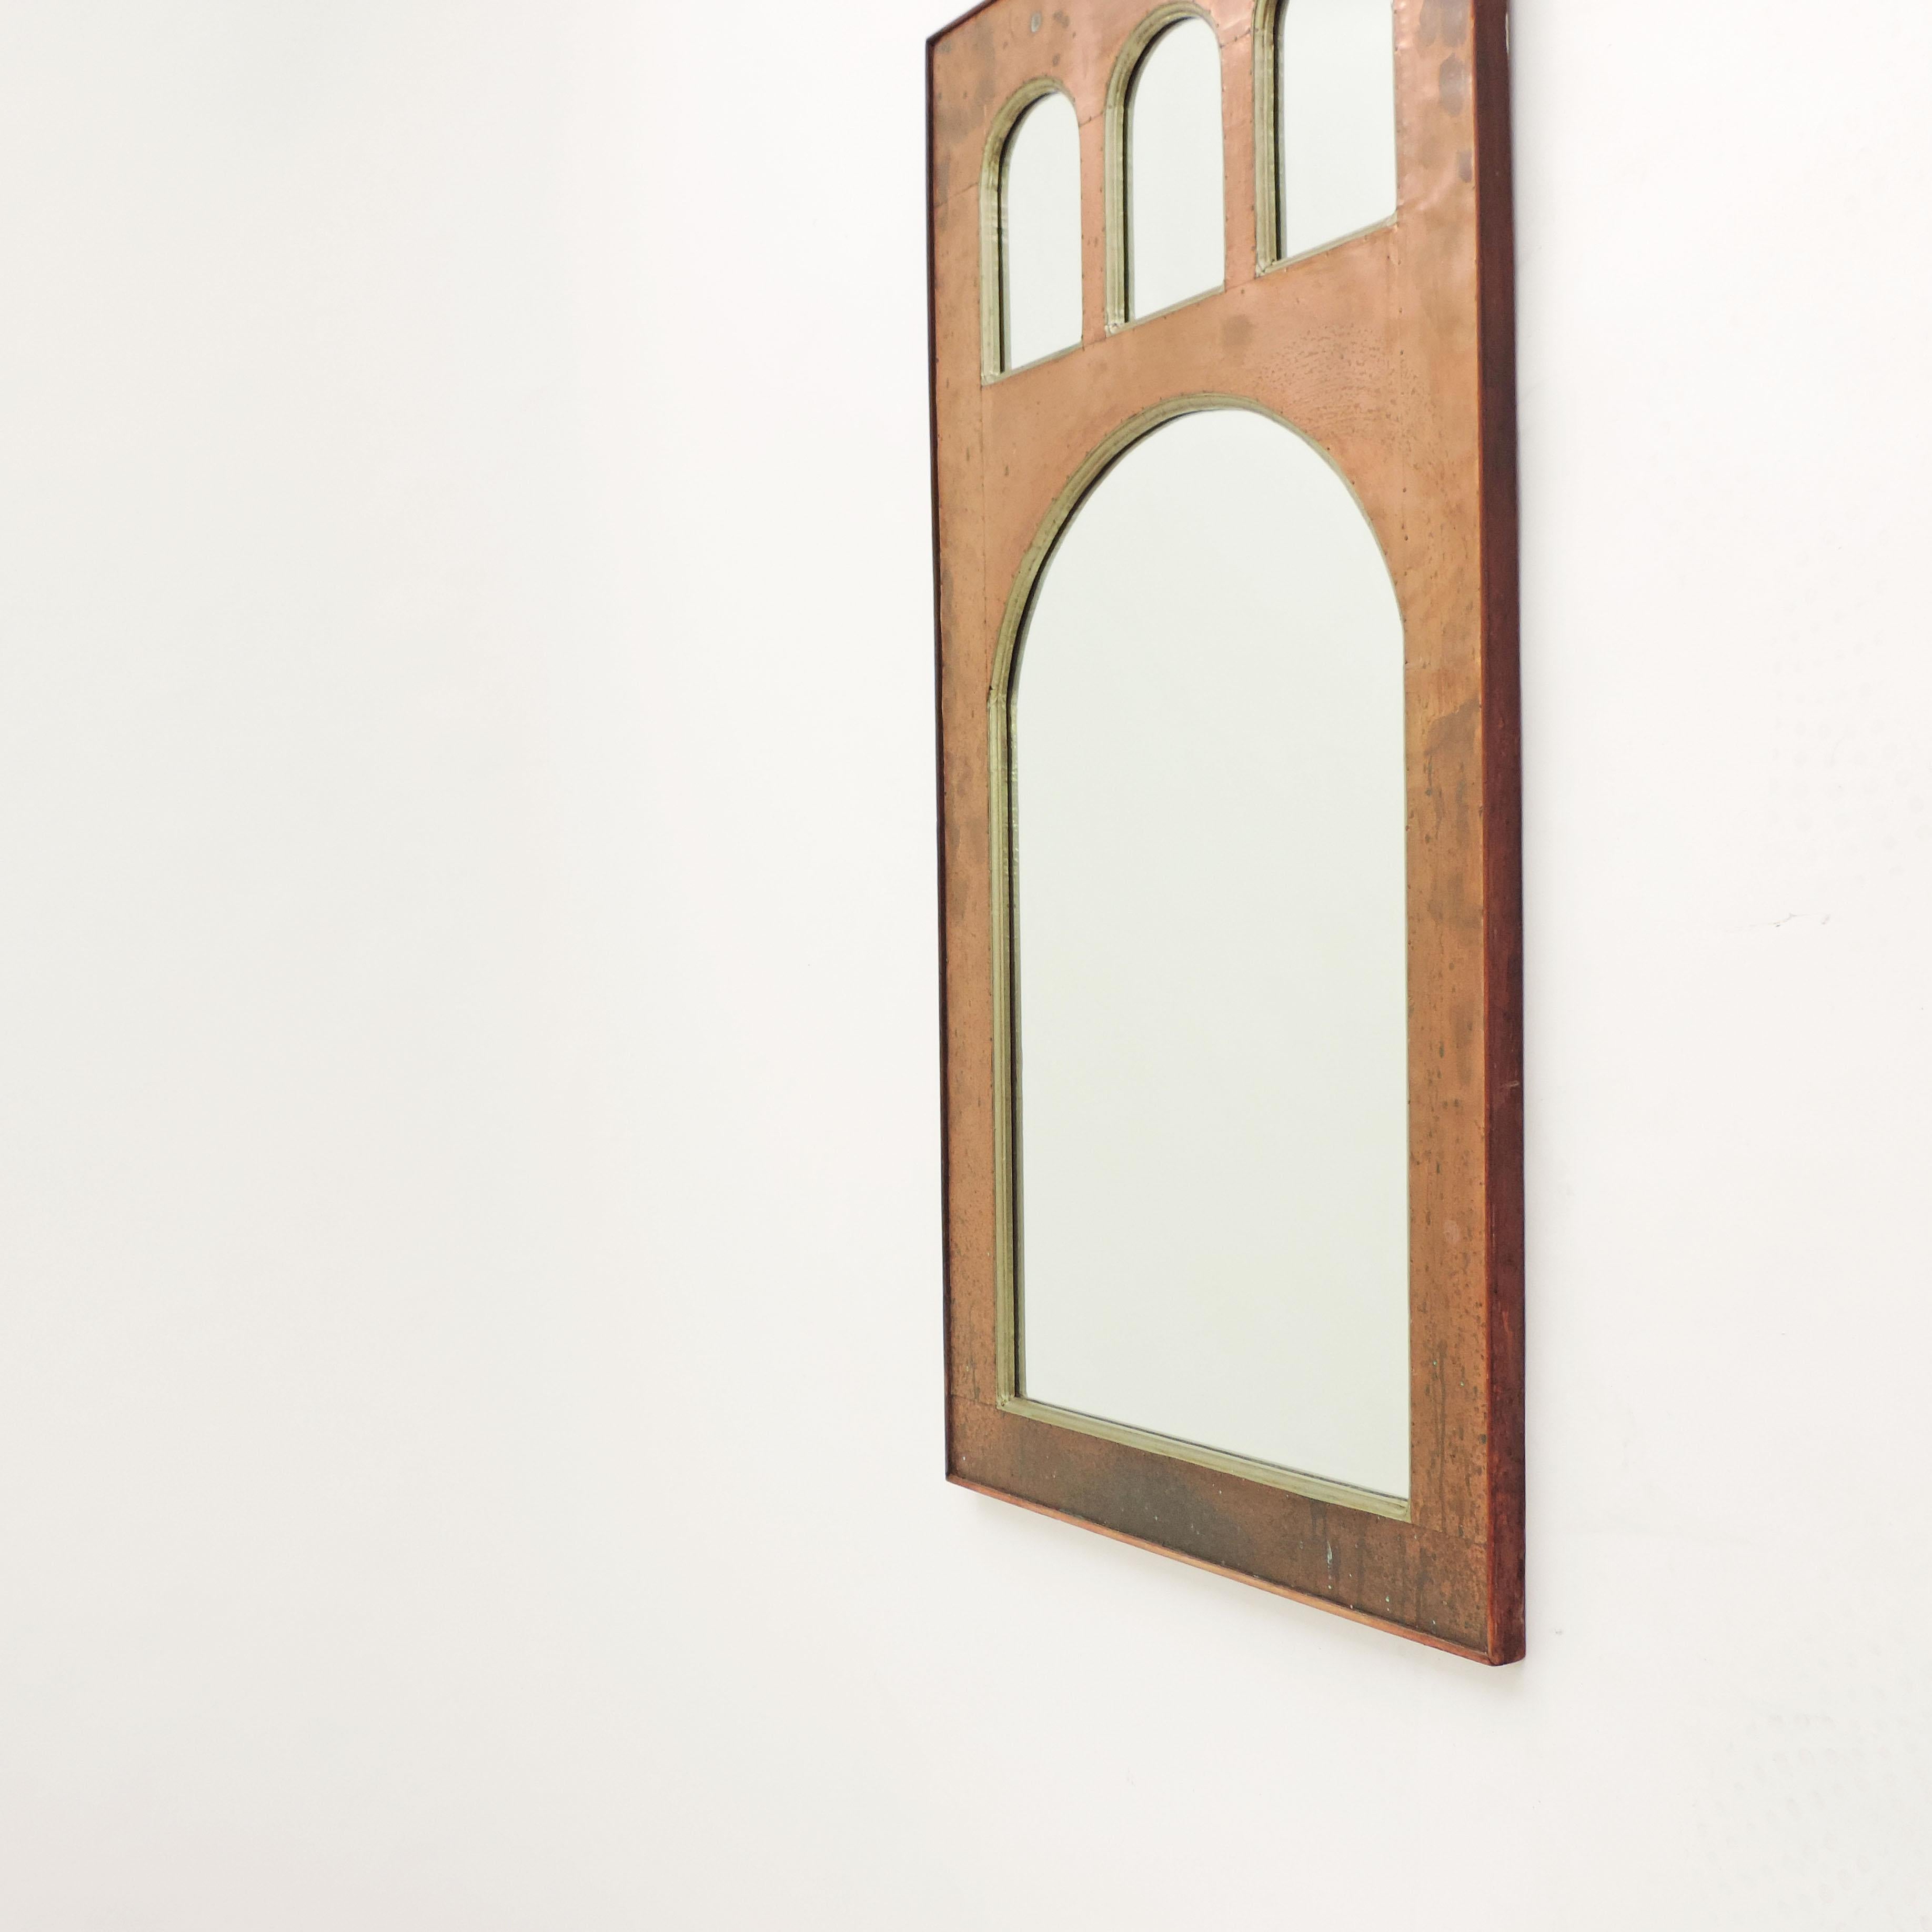 Mid-20th Century Italian Metaphysical  1960s Copper on wood Wall Mirror  For Sale